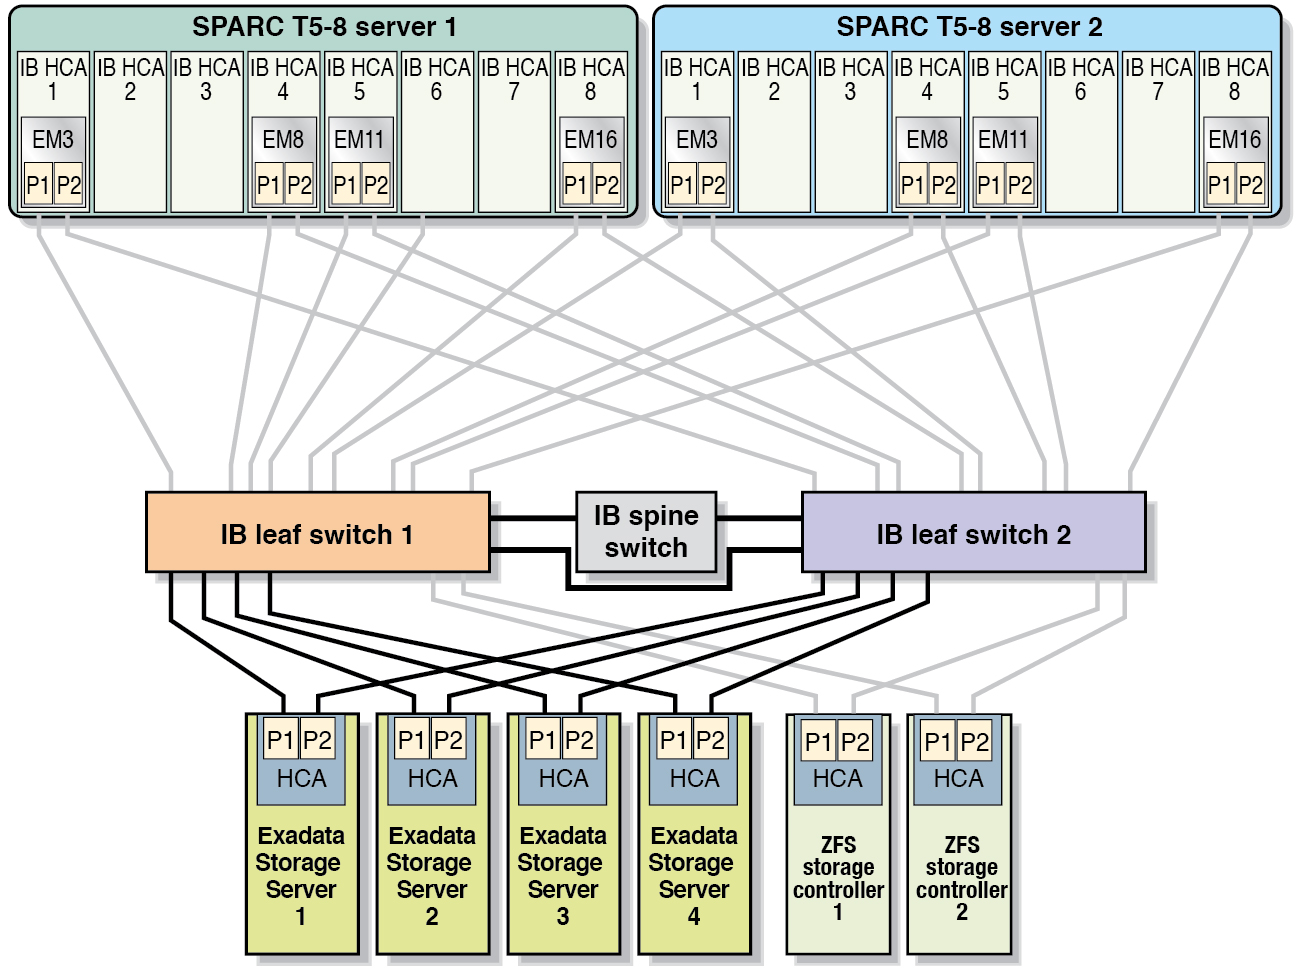 image:Graphic showing the InfiniBand connections for the Exadata Storage Servers in a Half Rack.